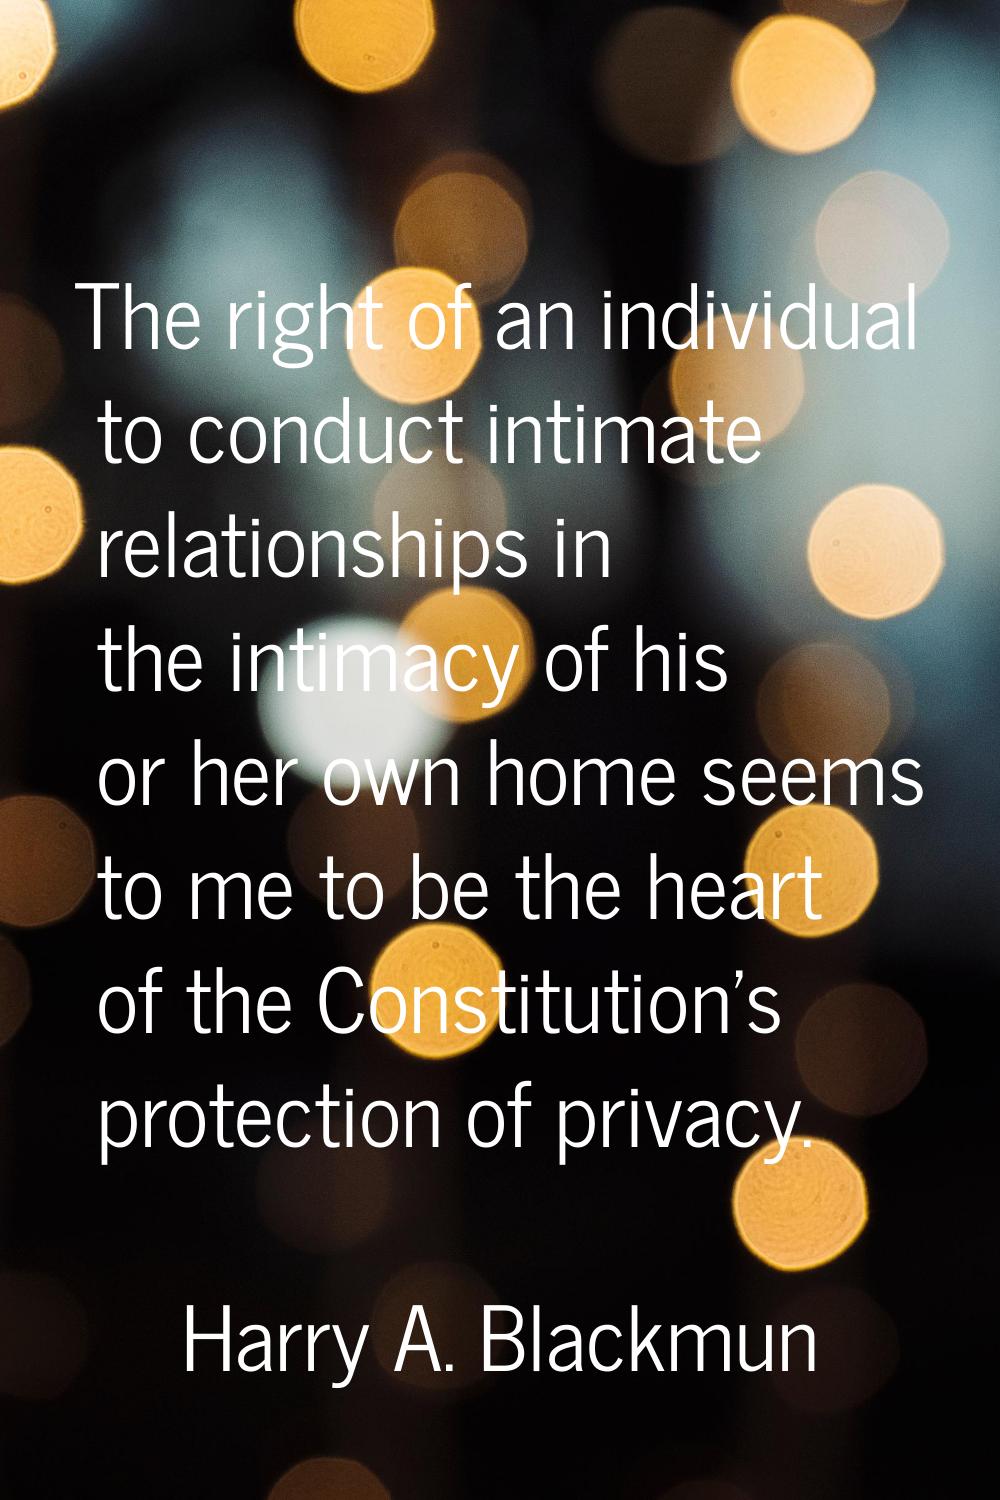 The right of an individual to conduct intimate relationships in the intimacy of his or her own home